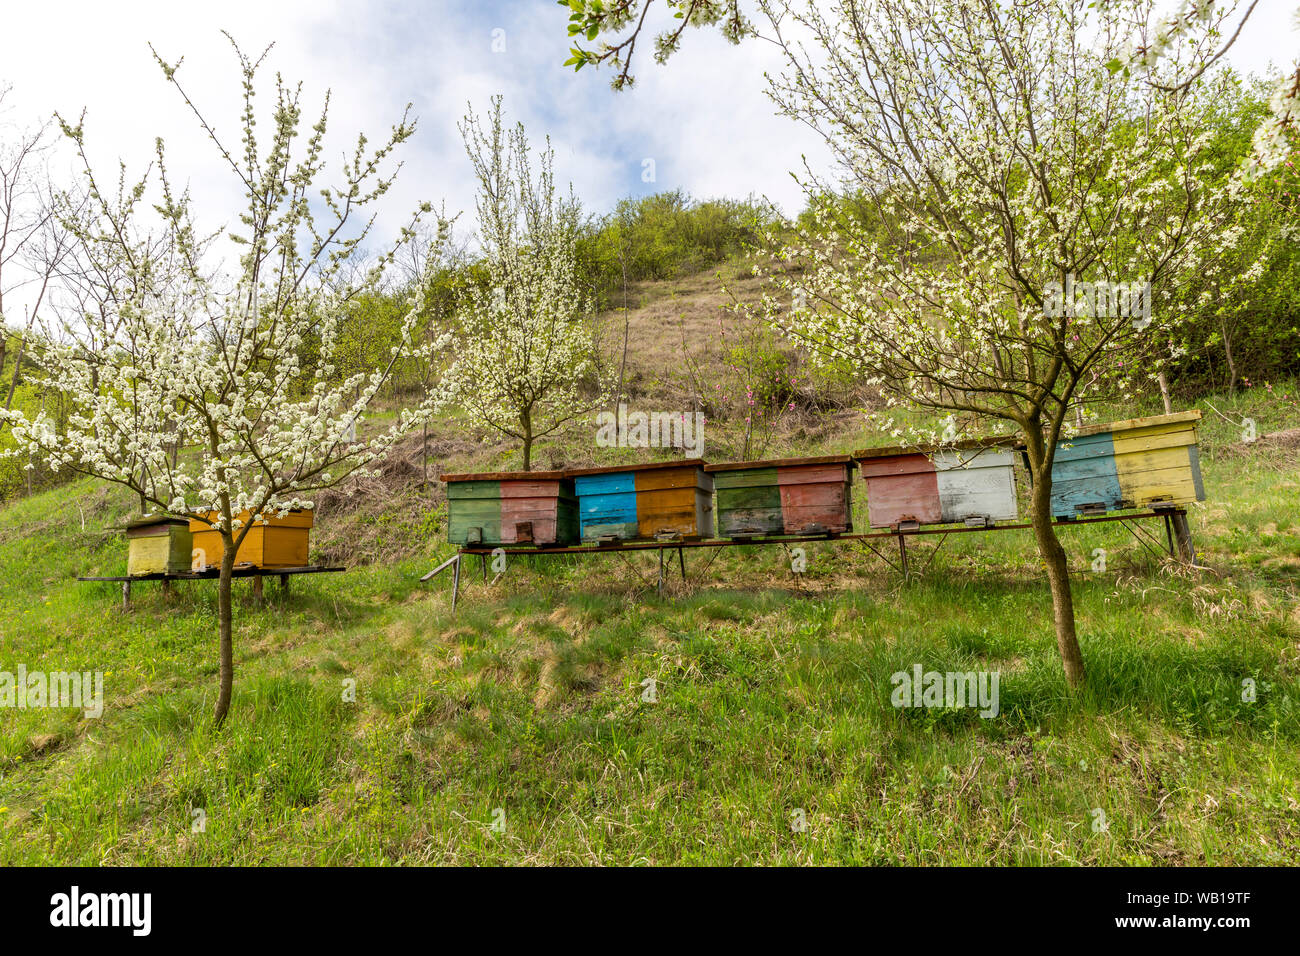 Rumania, Ciresoaia, beehives at flowering cherry trees Stock Photo